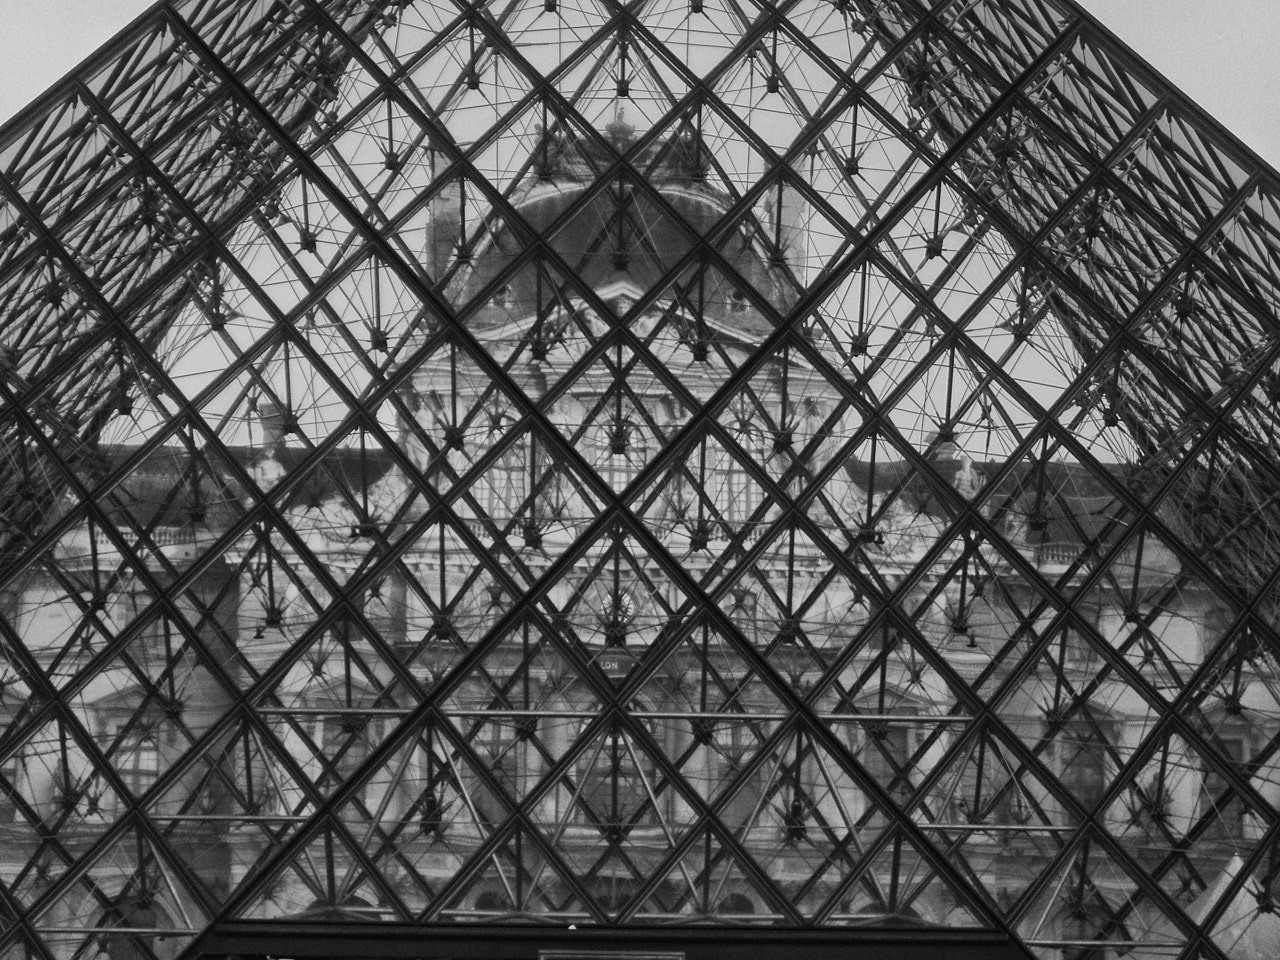 Olympus X-2,C-50Z sample photo. Looking through the louvre pyramid photography